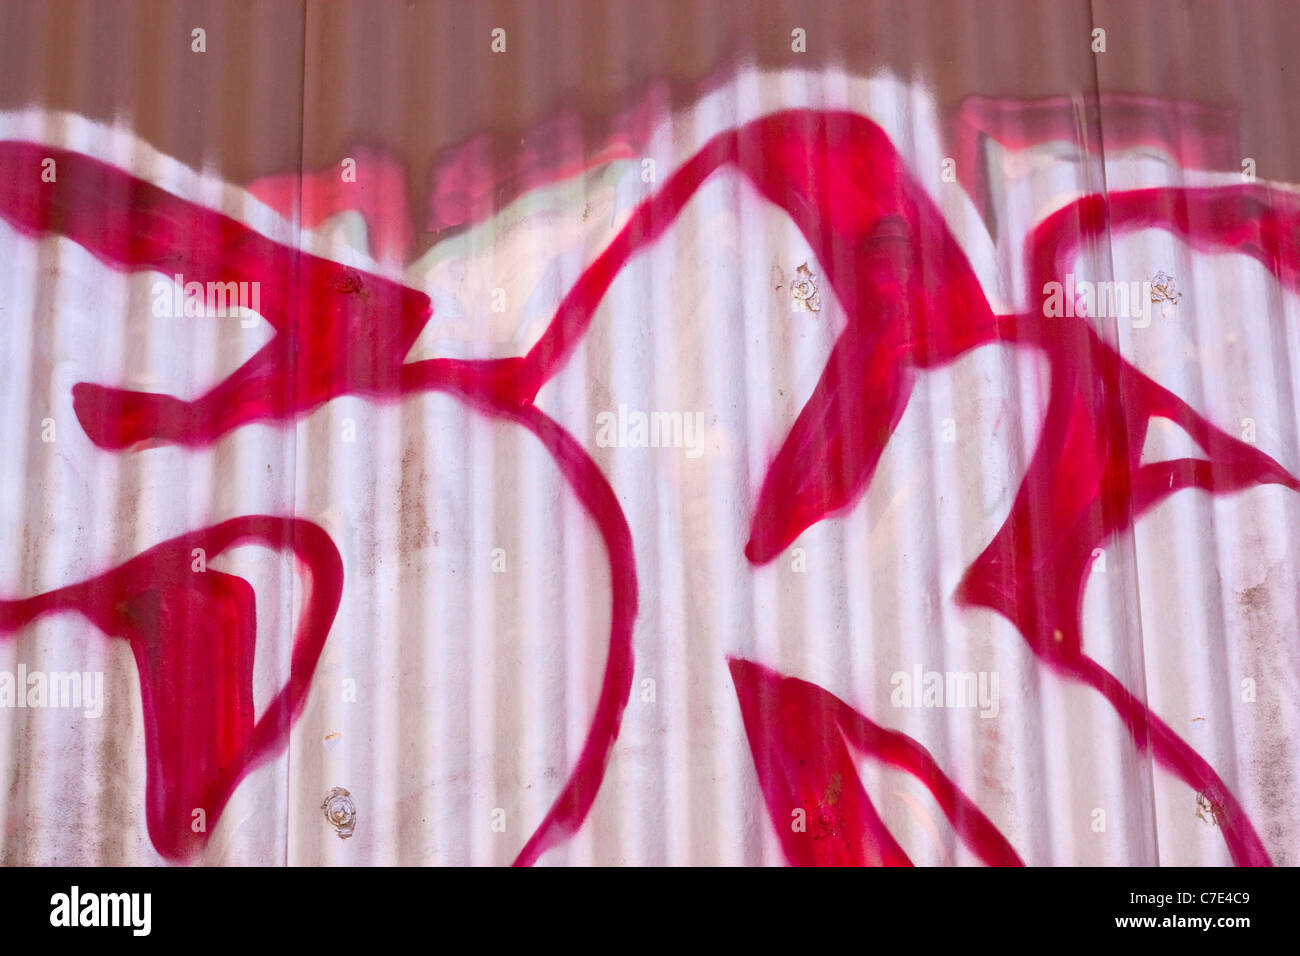 Graffiti texture - works great as a background or backdrop in any design. Stock Photo